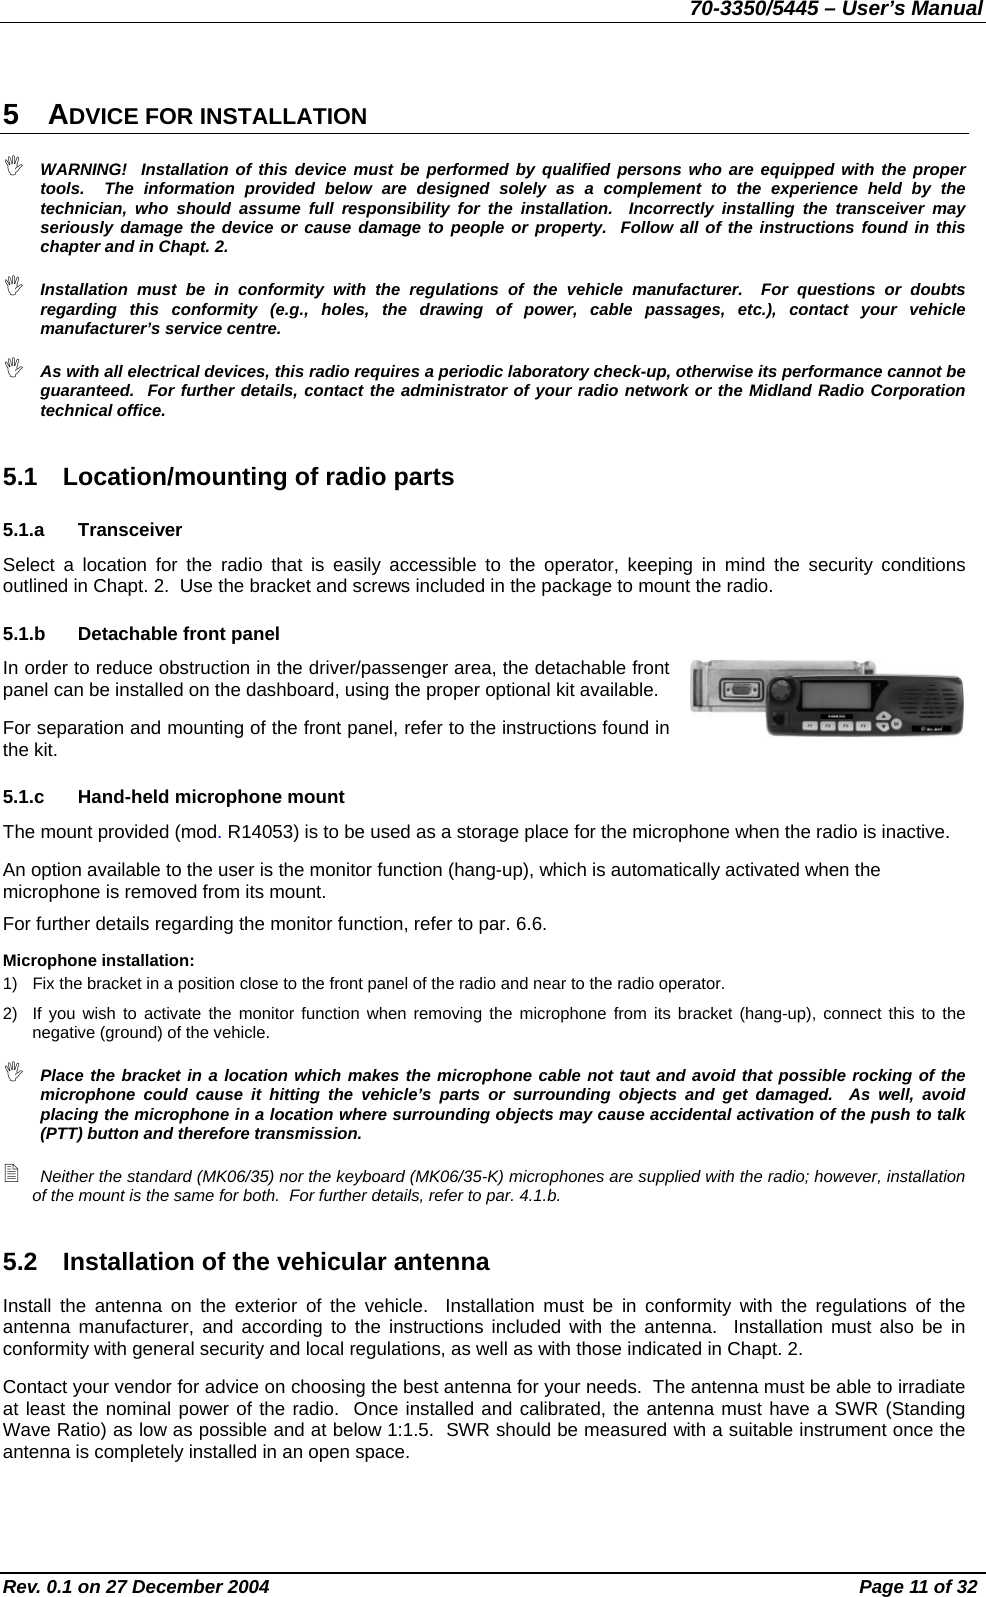 70-3350/5445 – User’s Manual 5 ADVICE FOR INSTALLATION  WARNING!  Installation of this device must be performed by qualified persons who are equipped with the proper tools.  The information provided below are designed solely as a complement to the experience held by the technician, who should assume full responsibility for the installation.  Incorrectly installing the transceiver may seriously damage the device or cause damage to people or property.  Follow all of the instructions found in this chapter and in Chapt. 2.  Installation must be in conformity with the regulations of the vehicle manufacturer.  For questions or doubts regarding this conformity (e.g., holes, the drawing of power, cable passages, etc.), contact your vehicle manufacturer’s service centre.  As with all electrical devices, this radio requires a periodic laboratory check-up, otherwise its performance cannot be guaranteed.  For further details, contact the administrator of your radio network or the Midland Radio Corporation technical office. 5.1  Location/mounting of radio parts 5.1.a Transceiver Select a location for the radio that is easily accessible to the operator, keeping in mind the security conditions outlined in Chapt. 2.  Use the bracket and screws included in the package to mount the radio. 5.1.b  Detachable front panel In order to reduce obstruction in the driver/passenger area, the detachable front panel can be installed on the dashboard, using the proper optional kit available. For separation and mounting of the front panel, refer to the instructions found in the kit. 5.1.c  Hand-held microphone mount The mount provided (mod. R14053) is to be used as a storage place for the microphone when the radio is inactive. An option available to the user is the monitor function (hang-up), which is automatically activated when the microphone is removed from its mount. For further details regarding the monitor function, refer to par. 6.6. Microphone installation: 1)  Fix the bracket in a position close to the front panel of the radio and near to the radio operator. 2)  If you wish to activate the monitor function when removing the microphone from its bracket (hang-up), connect this to the negative (ground) of the vehicle.  Place the bracket in a location which makes the microphone cable not taut and avoid that possible rocking of the microphone could cause it hitting the vehicle’s parts or surrounding objects and get damaged.  As well, avoid placing the microphone in a location where surrounding objects may cause accidental activation of the push to talk (PTT) button and therefore transmission.  Neither the standard (MK06/35) nor the keyboard (MK06/35-K) microphones are supplied with the radio; however, installation of the mount is the same for both.  For further details, refer to par. 4.1.b. 5.2  Installation of the vehicular antenna Install the antenna on the exterior of the vehicle.  Installation must be in conformity with the regulations of the antenna manufacturer, and according to the instructions included with the antenna.  Installation must also be in conformity with general security and local regulations, as well as with those indicated in Chapt. 2. Contact your vendor for advice on choosing the best antenna for your needs.  The antenna must be able to irradiate at least the nominal power of the radio.  Once installed and calibrated, the antenna must have a SWR (Standing Wave Ratio) as low as possible and at below 1:1.5.  SWR should be measured with a suitable instrument once the antenna is completely installed in an open space. Rev. 0.1 on 27 December 2004  Page 11 of 32 